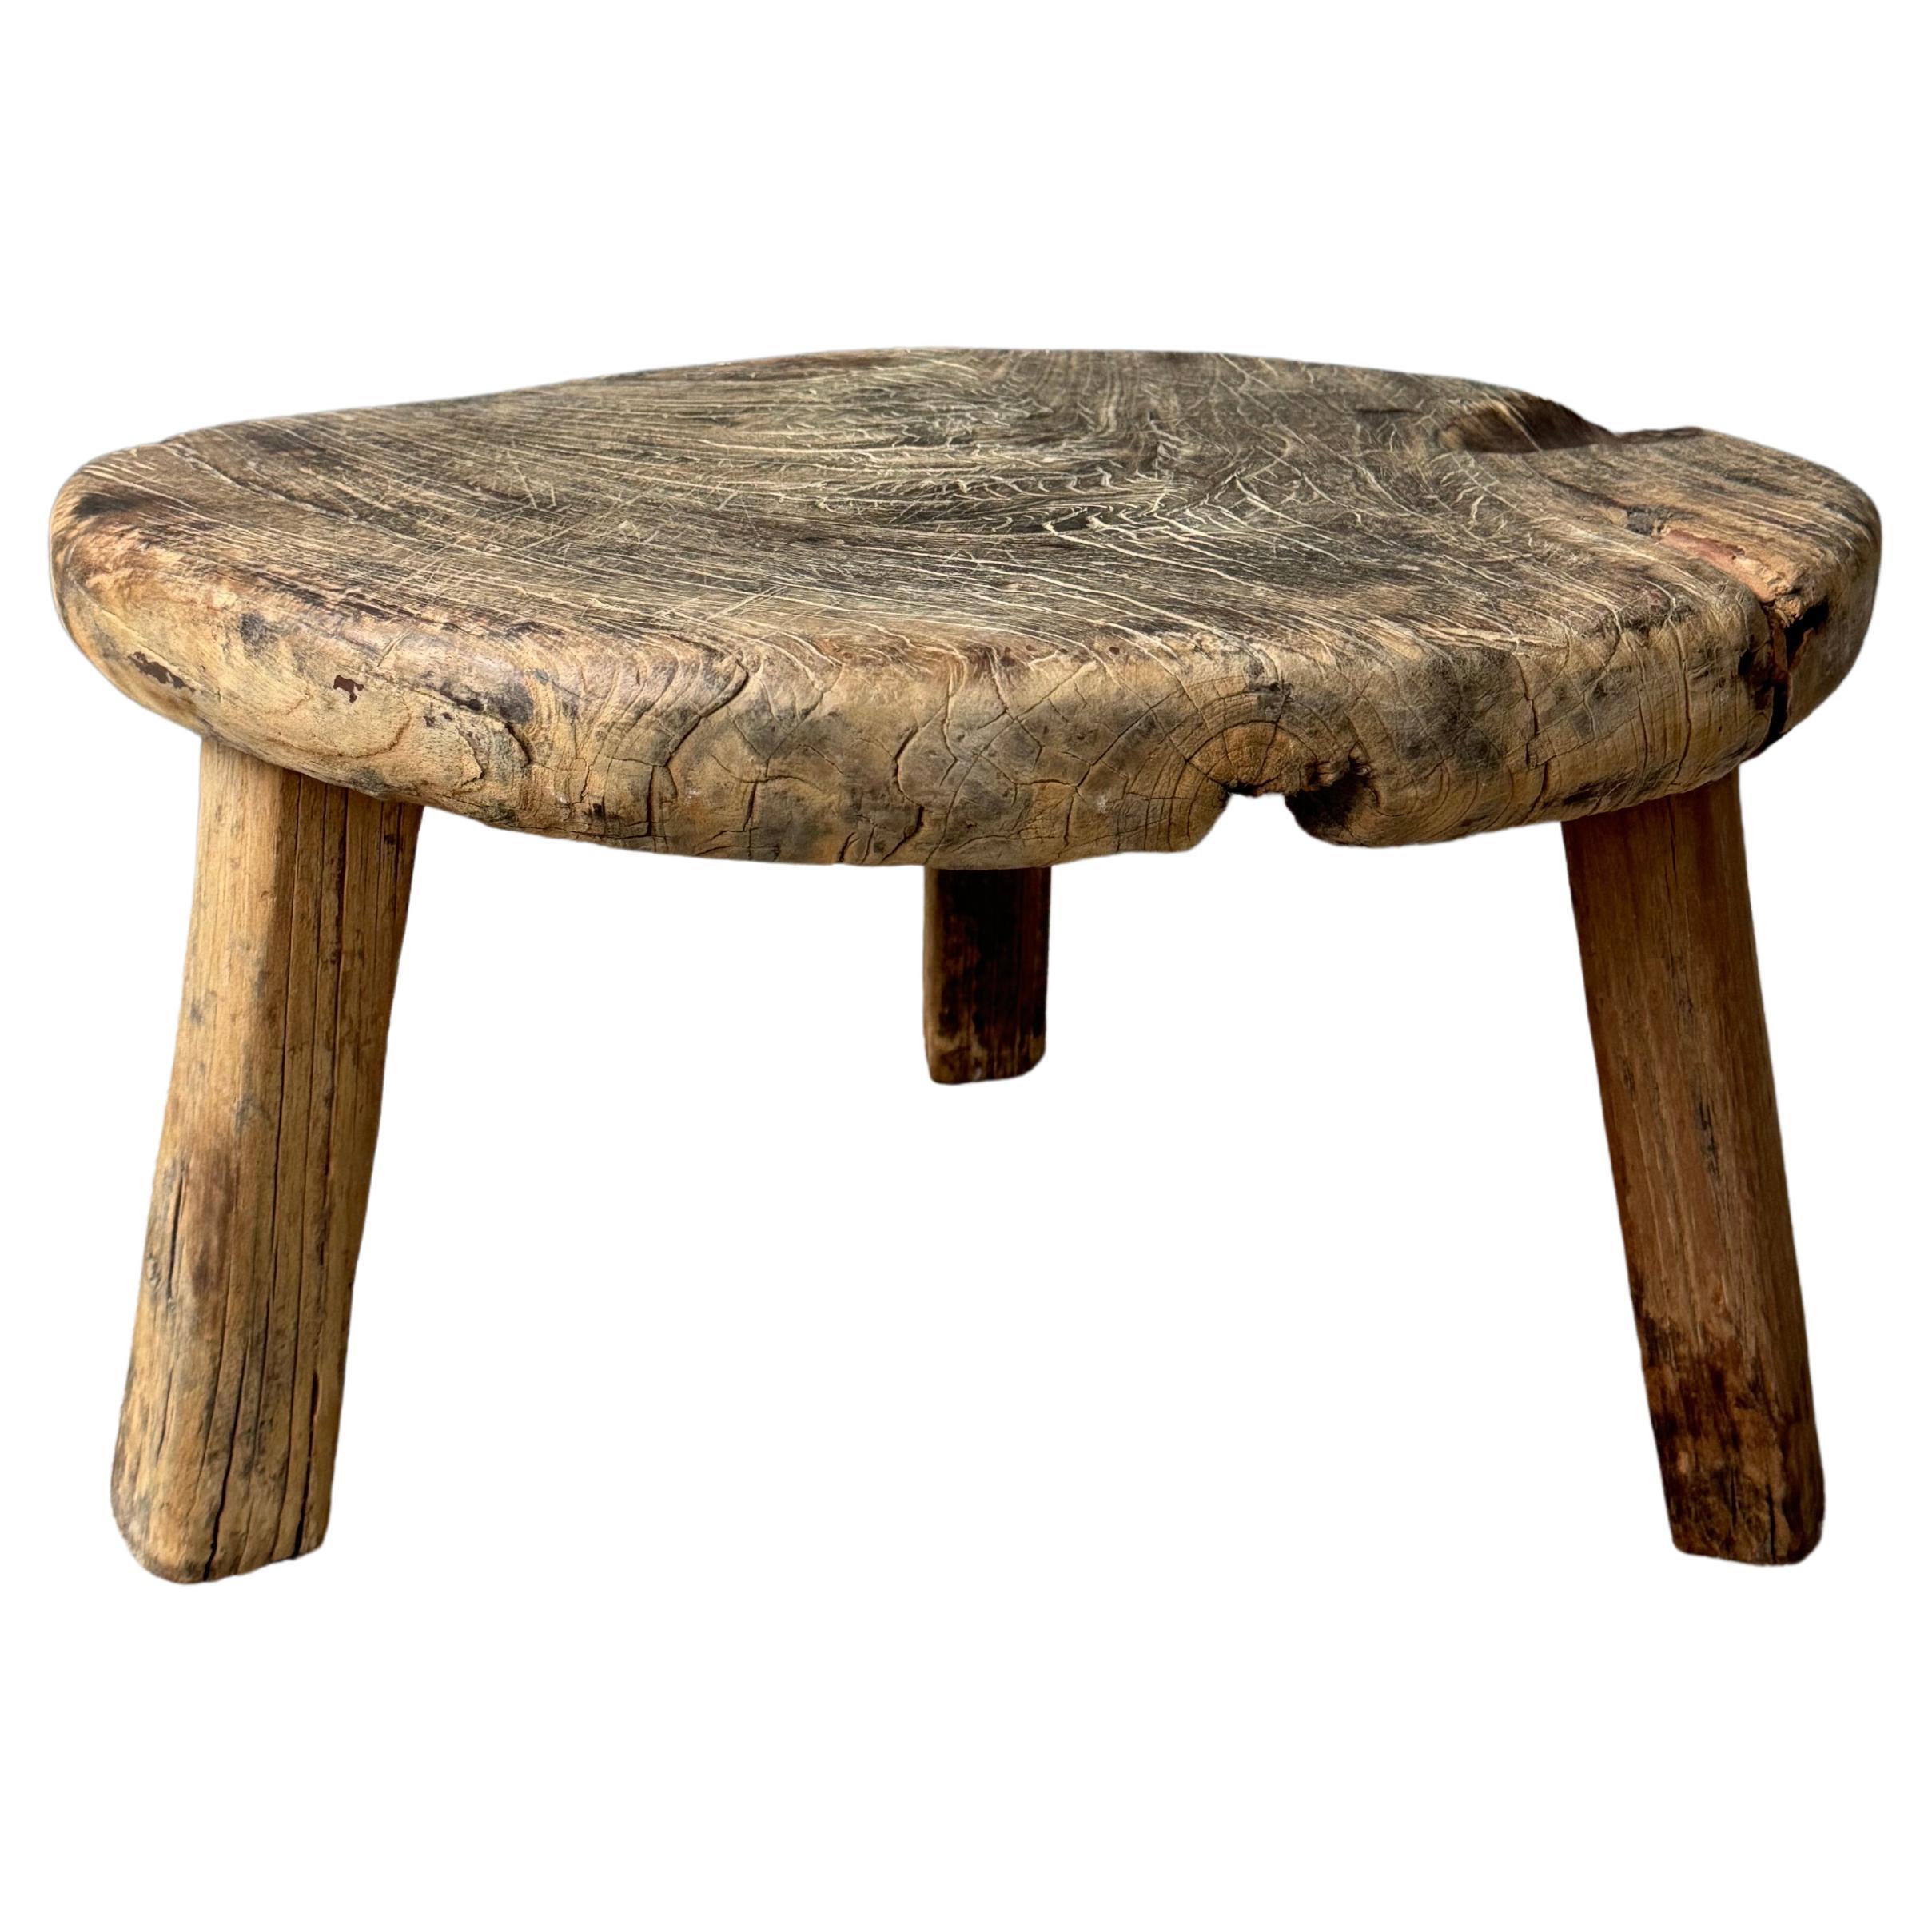 Primitive Hardwood Round Table From Central Yucatan, Late 20th Century  For Sale